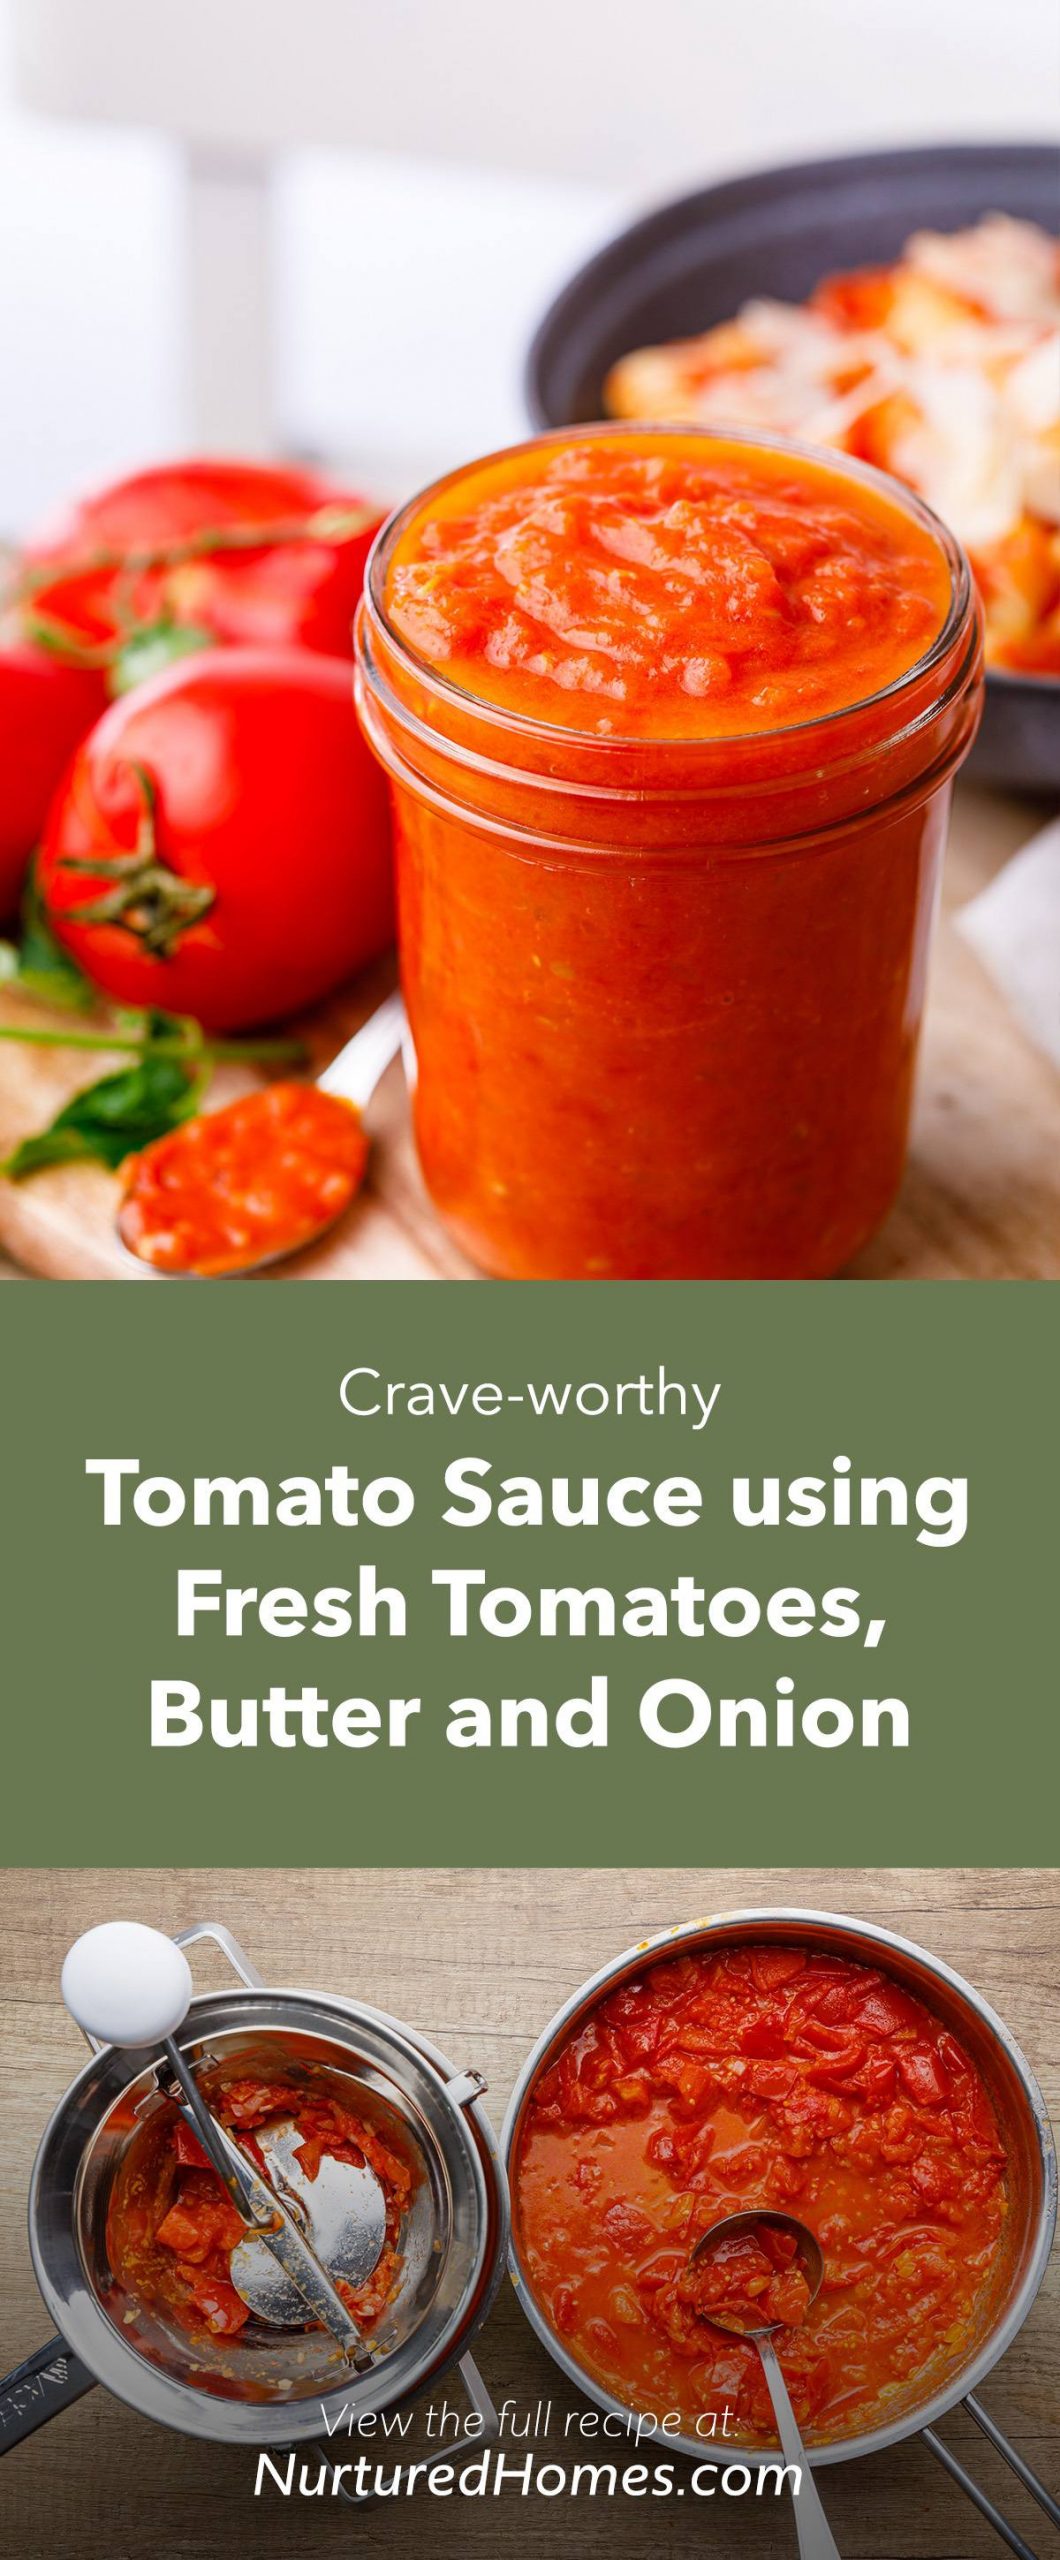 Crave-worthy Tomato Sauce Recipe using Fresh Tomatoes, Butter and Onion